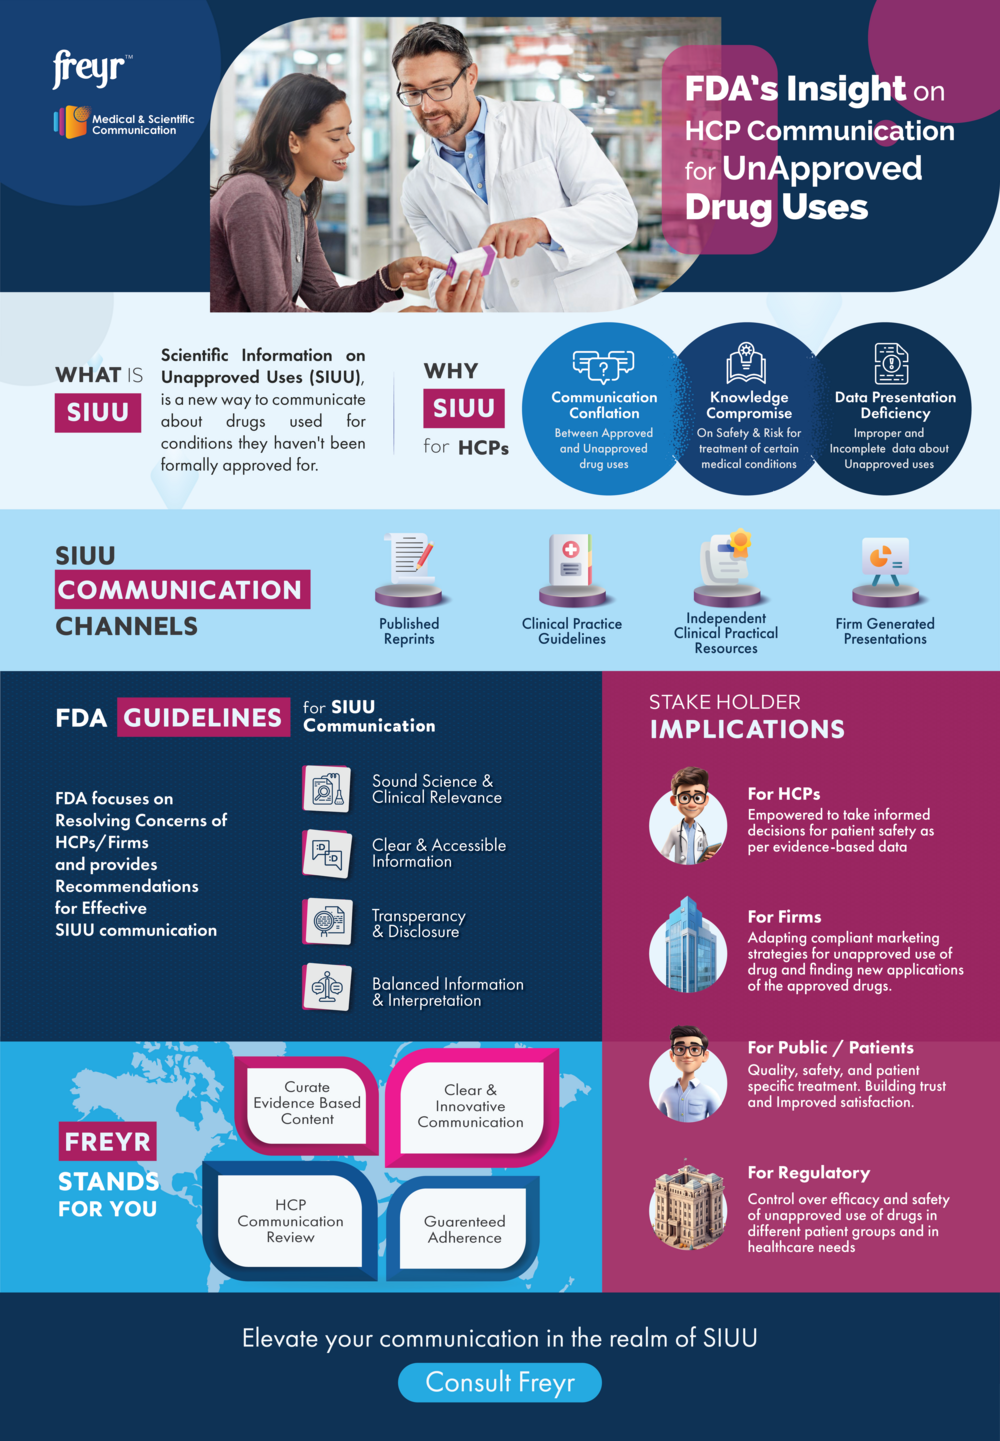 
FDA's Insight on HCP Communication for UnApproved Drug Uses
